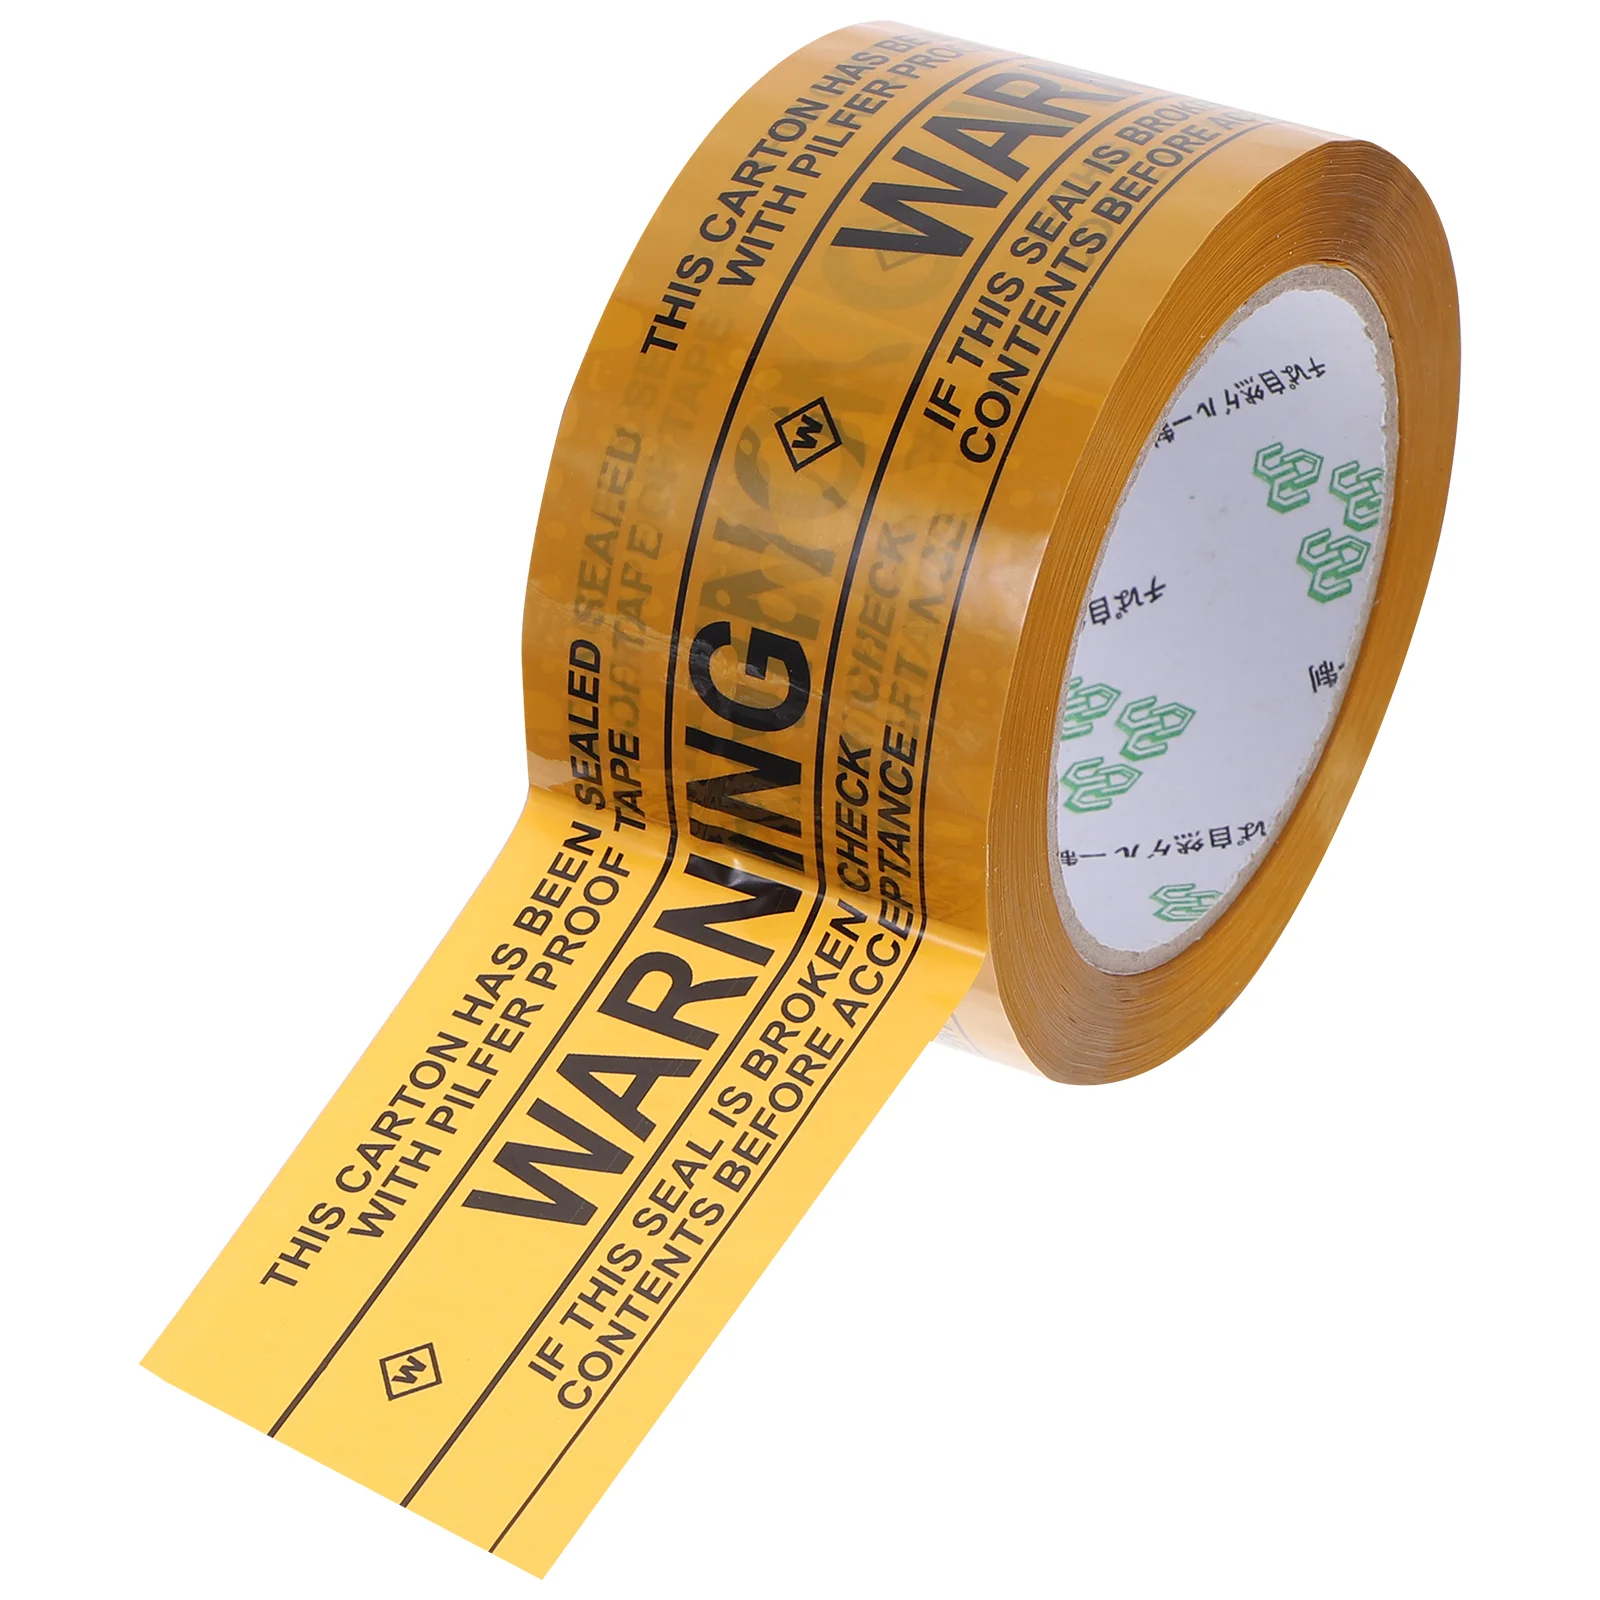 

Hazard Warning Tape Caution Danger Duct Black Color Electrical Christmas Shipping Safety Stripe